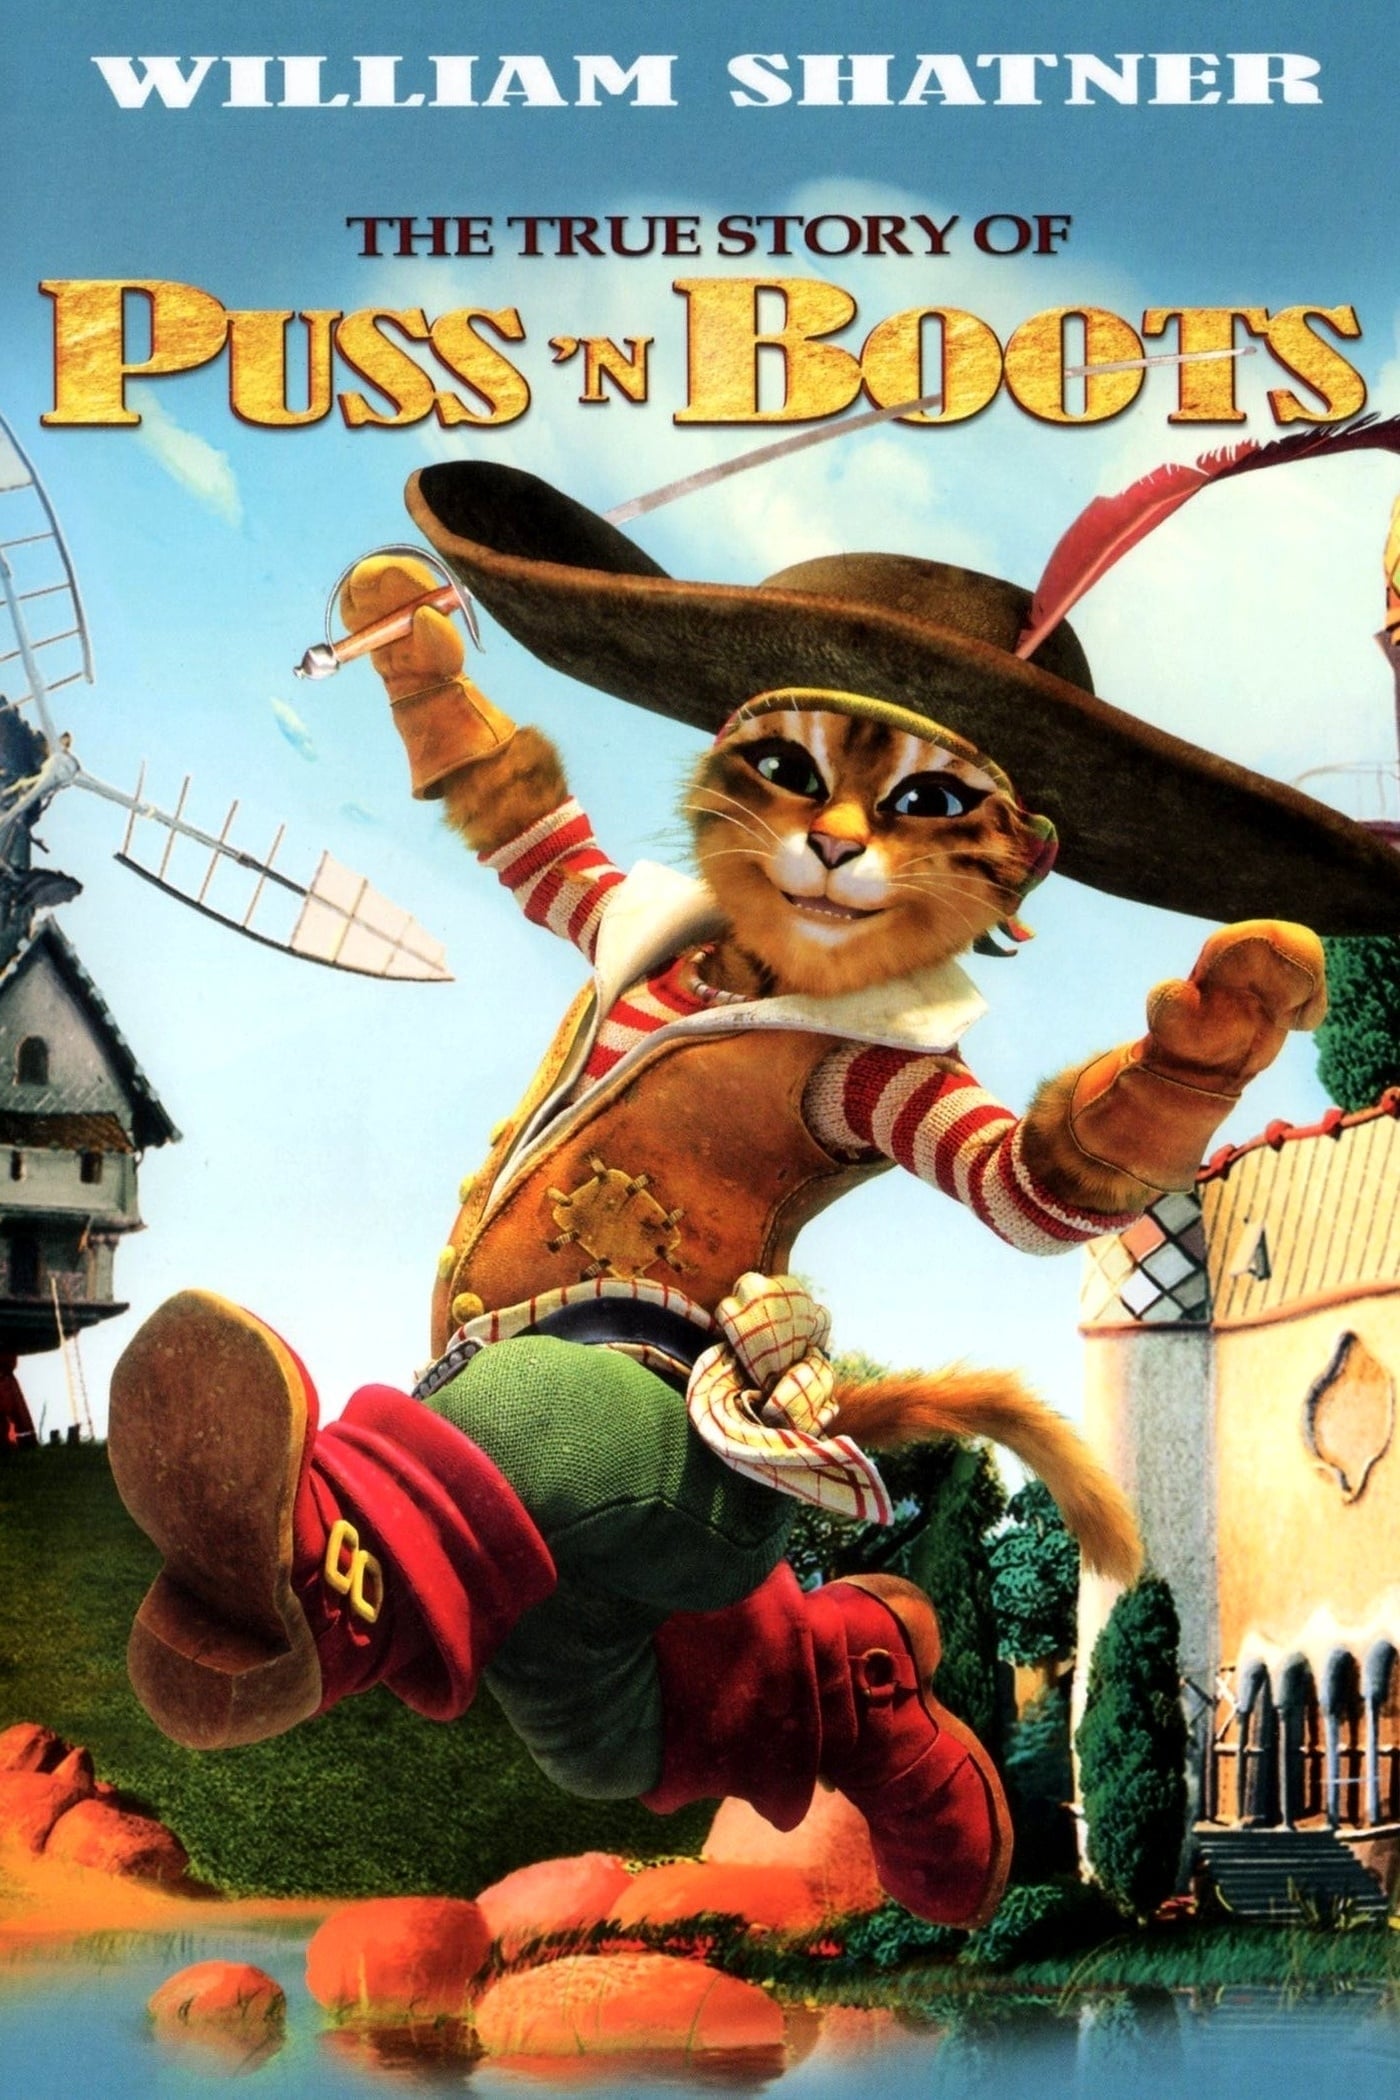 The True Story of Puss 'n Boots (2009)